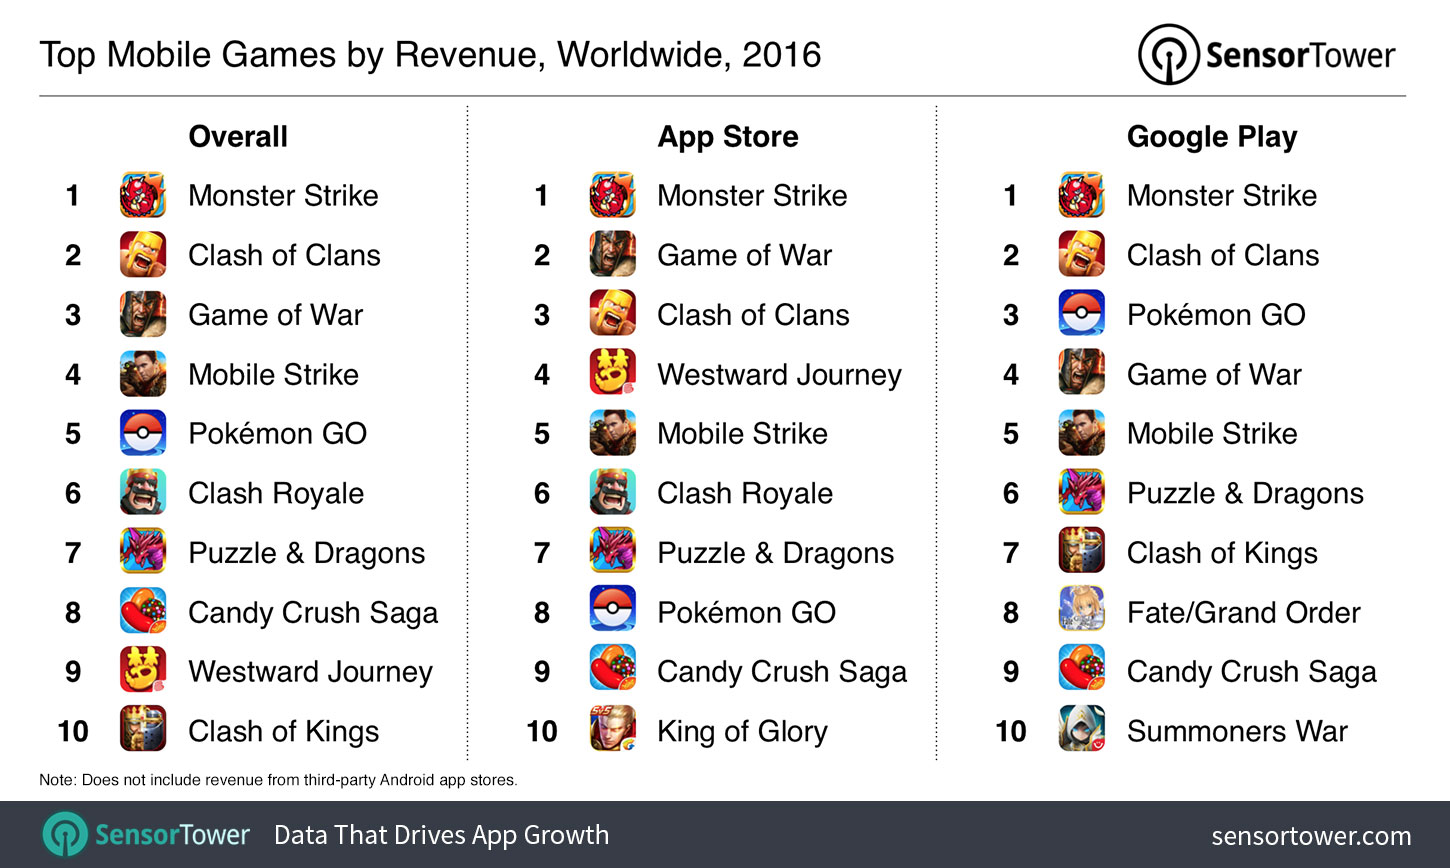 The most iconic mobile games of all time: Games that shaped the industry